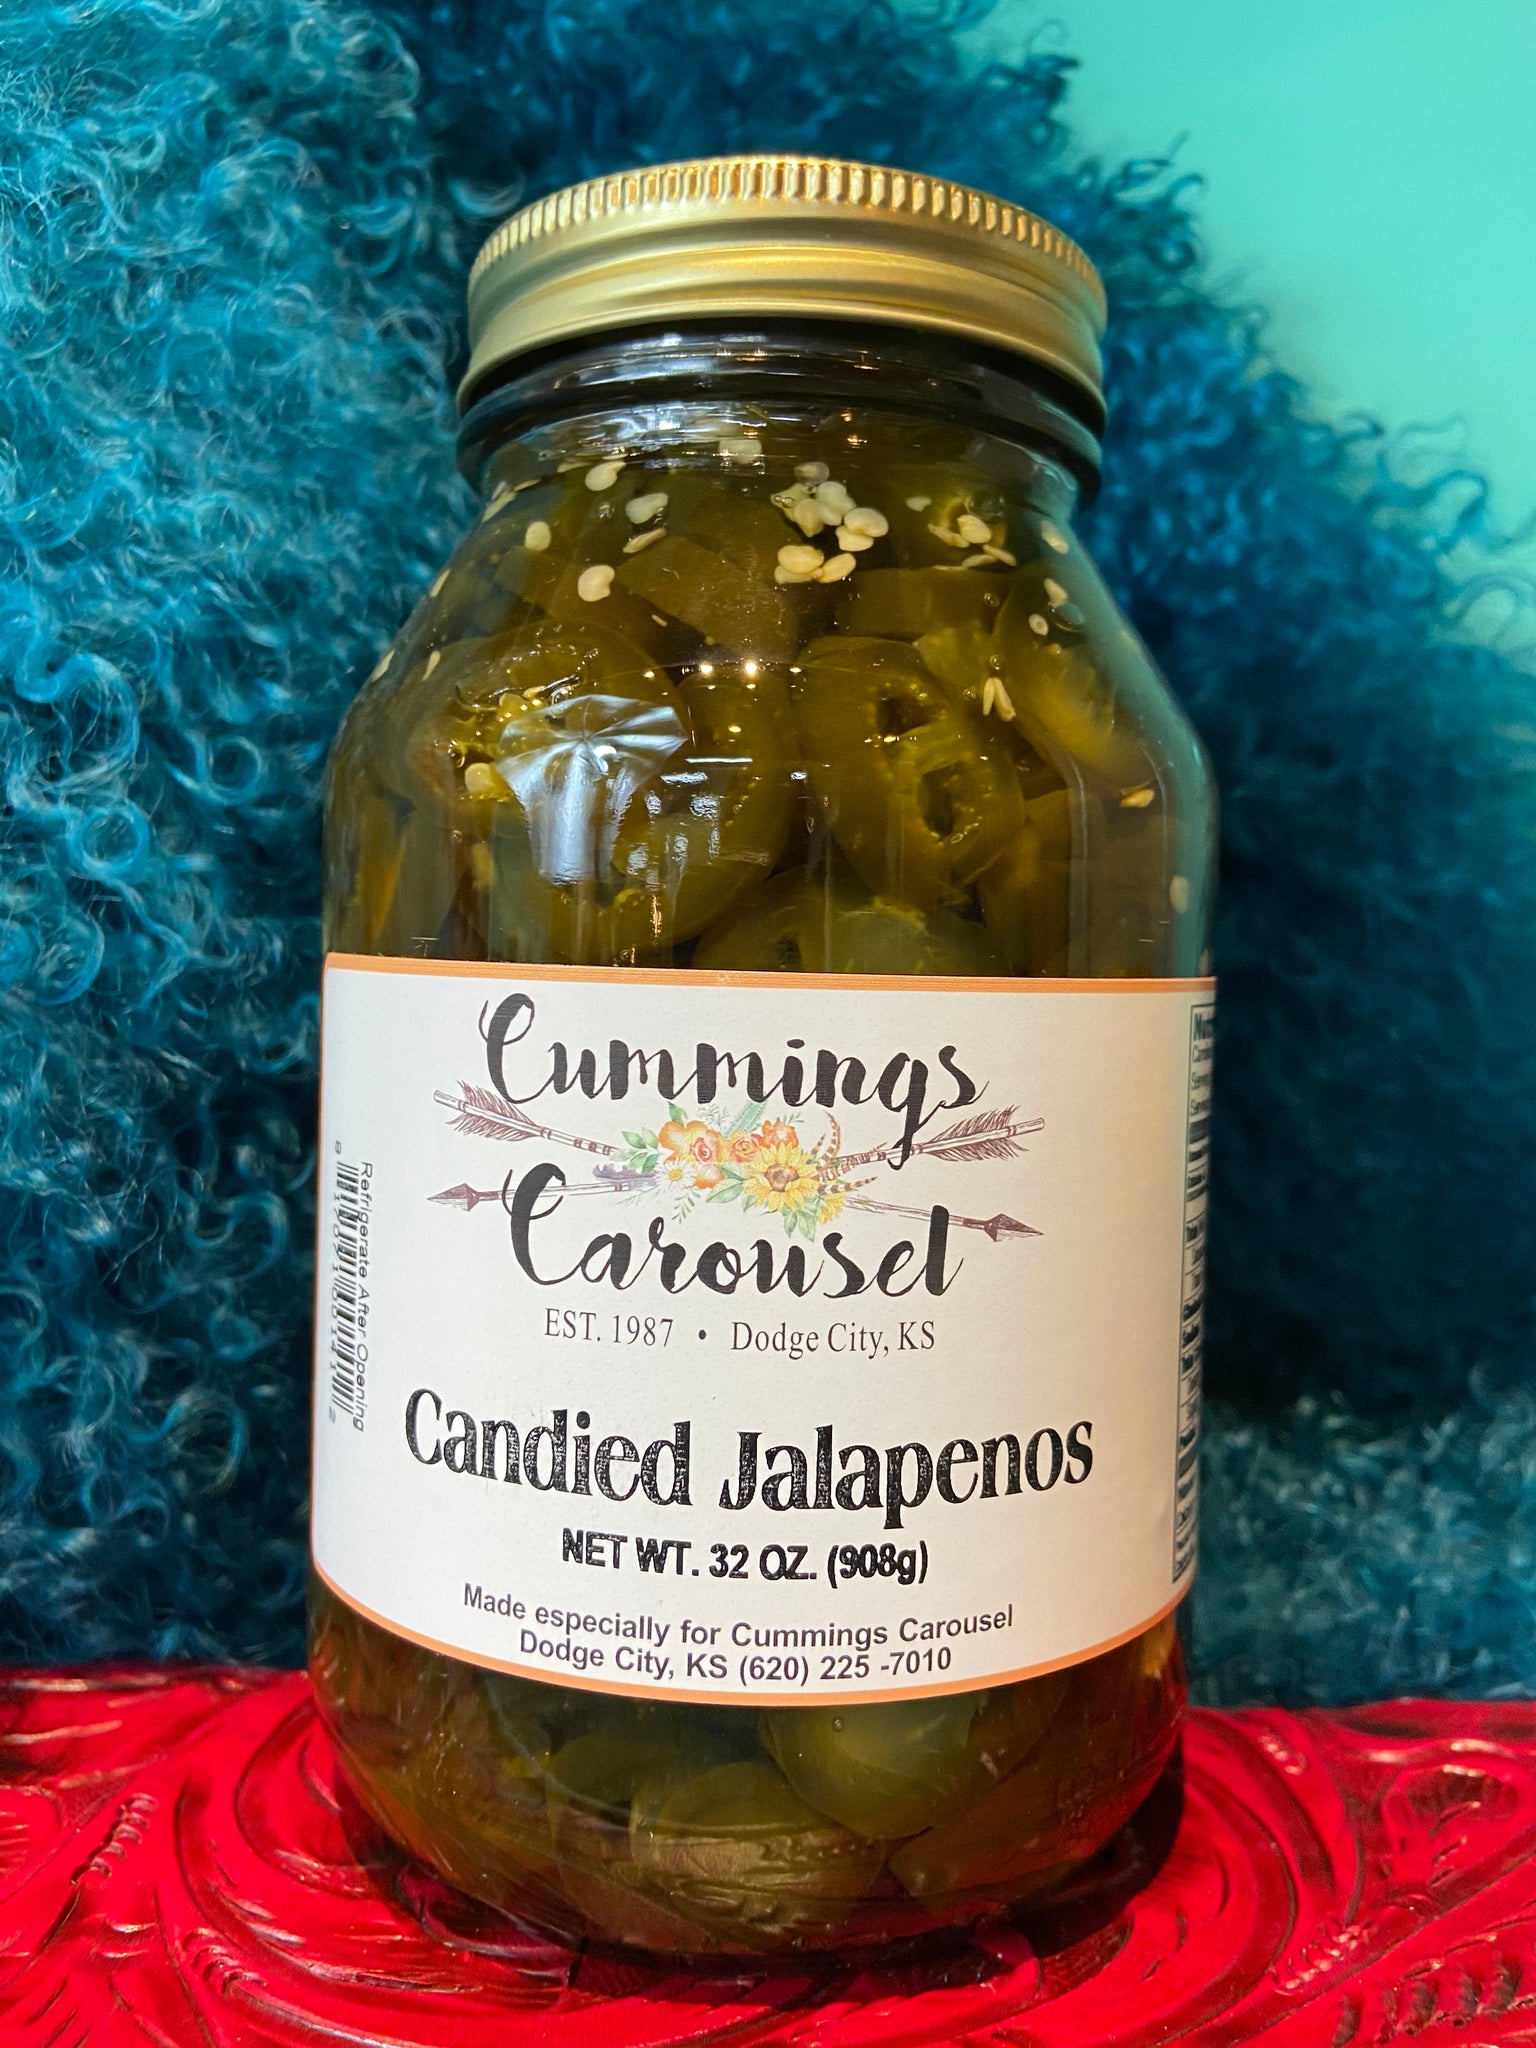 Candied Jalapeno